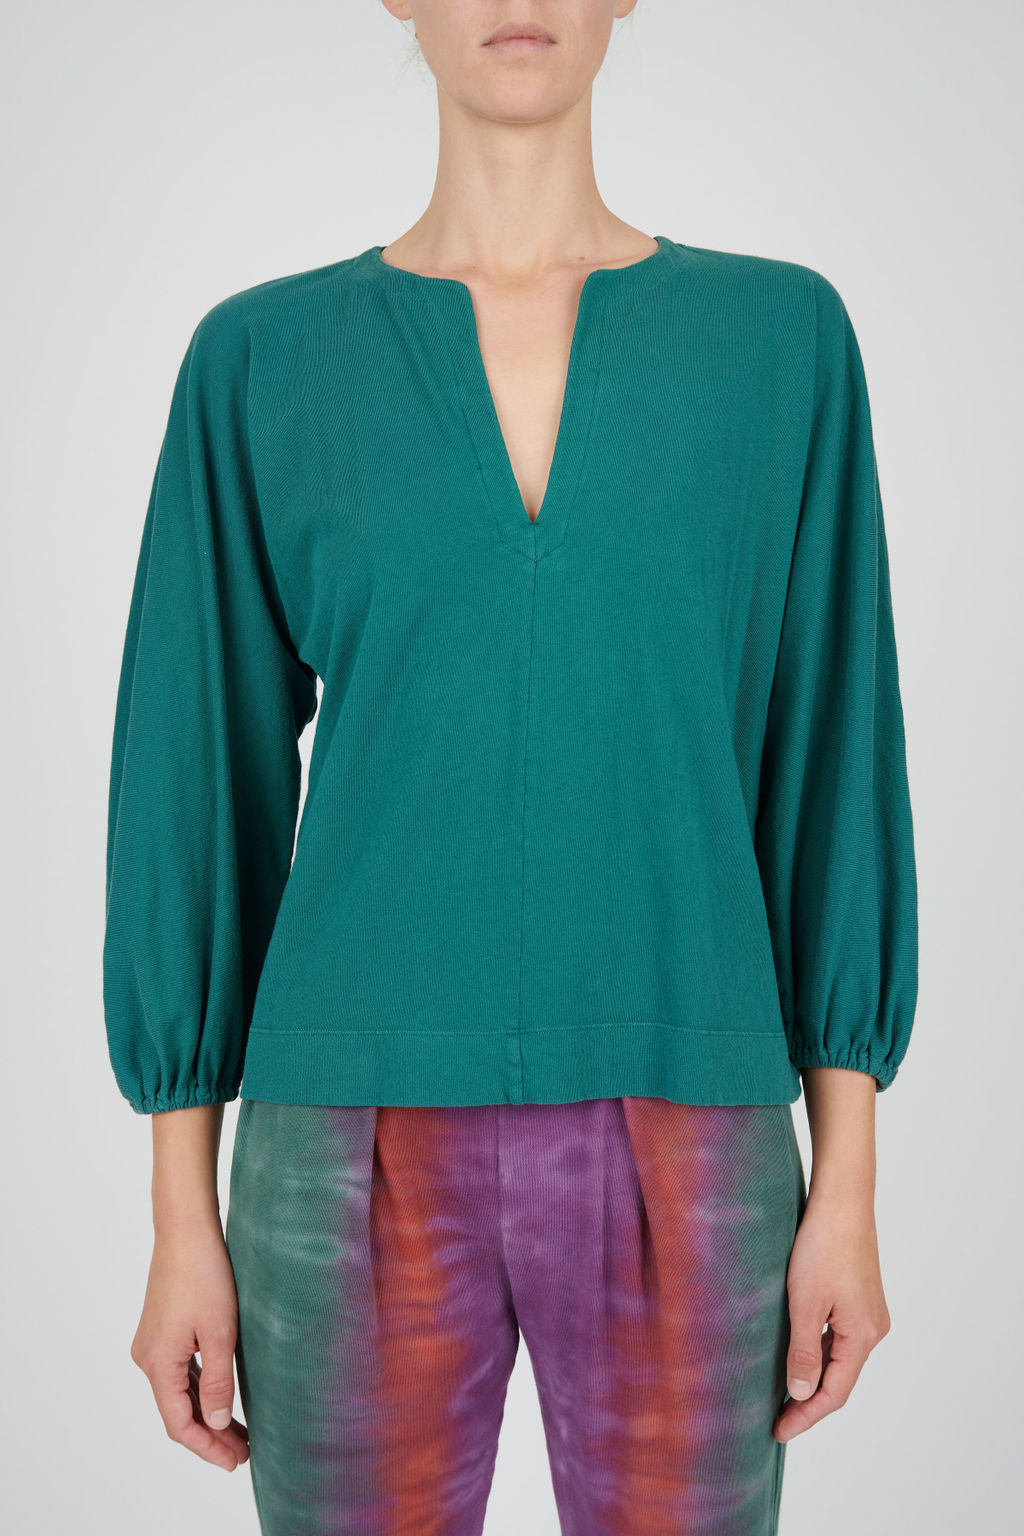 Teal Classic Jersey Getty Blouse